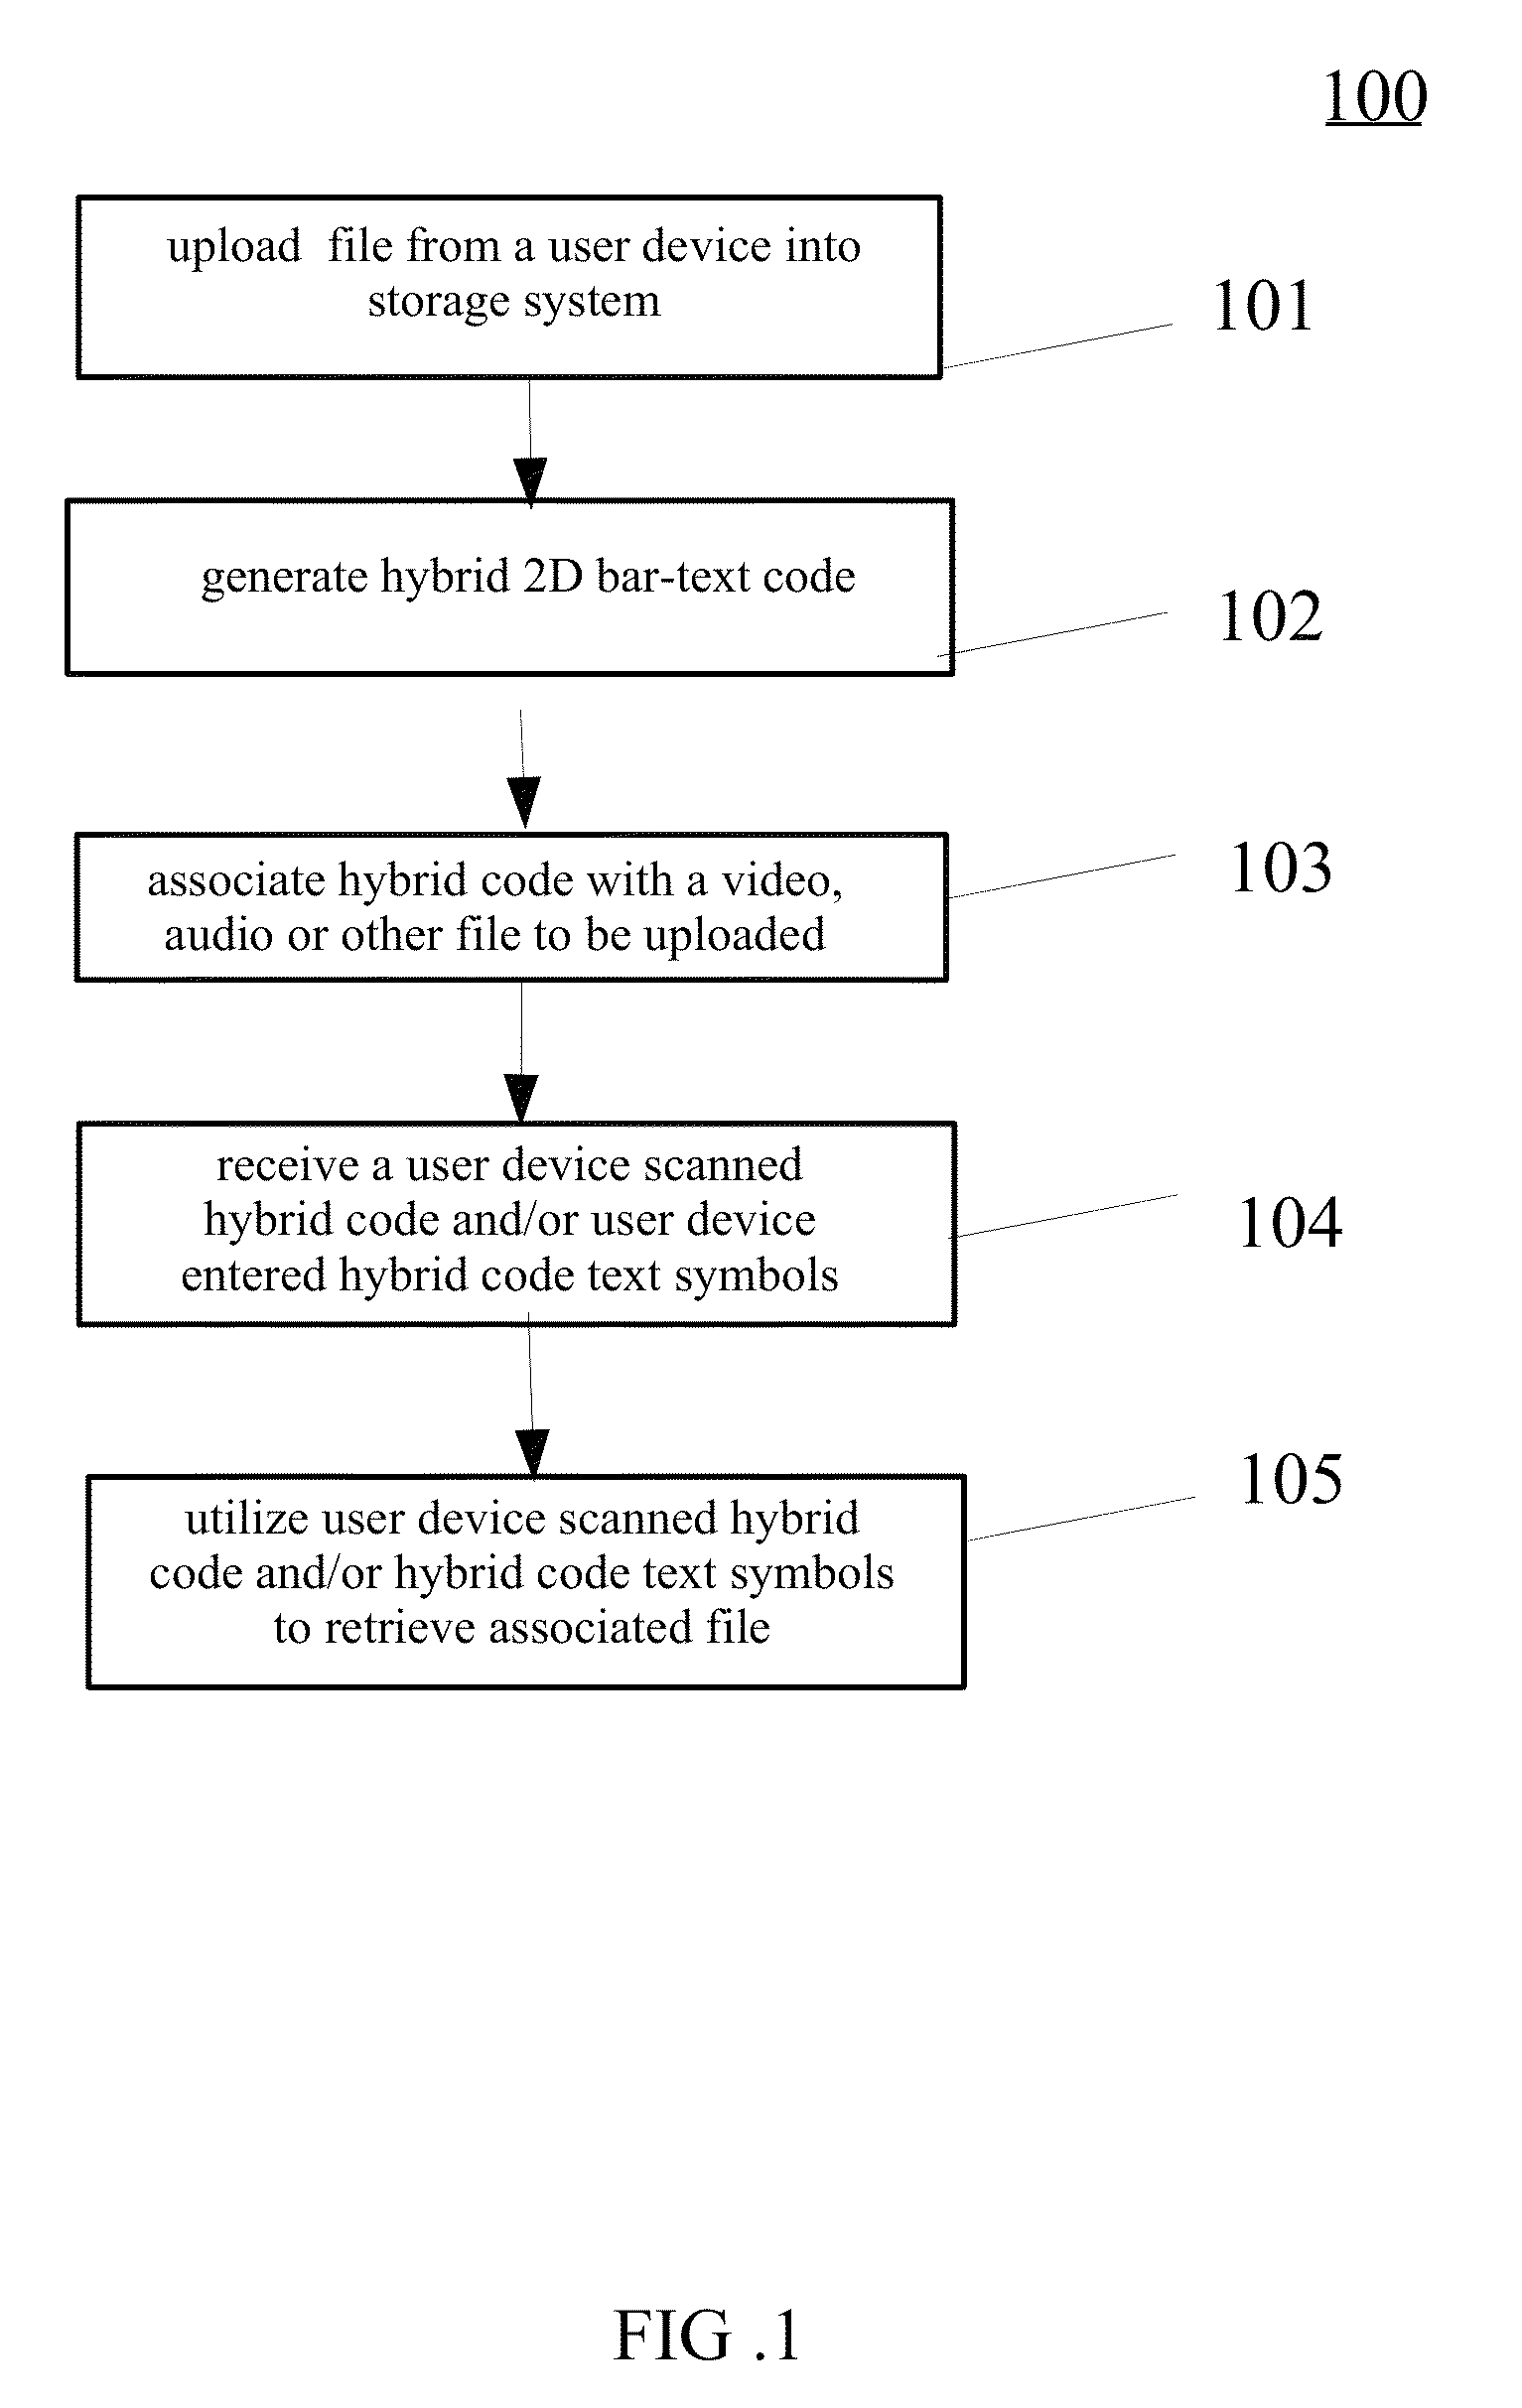 Apparatus and method for cloud based storage using a multi-layer scannable tag